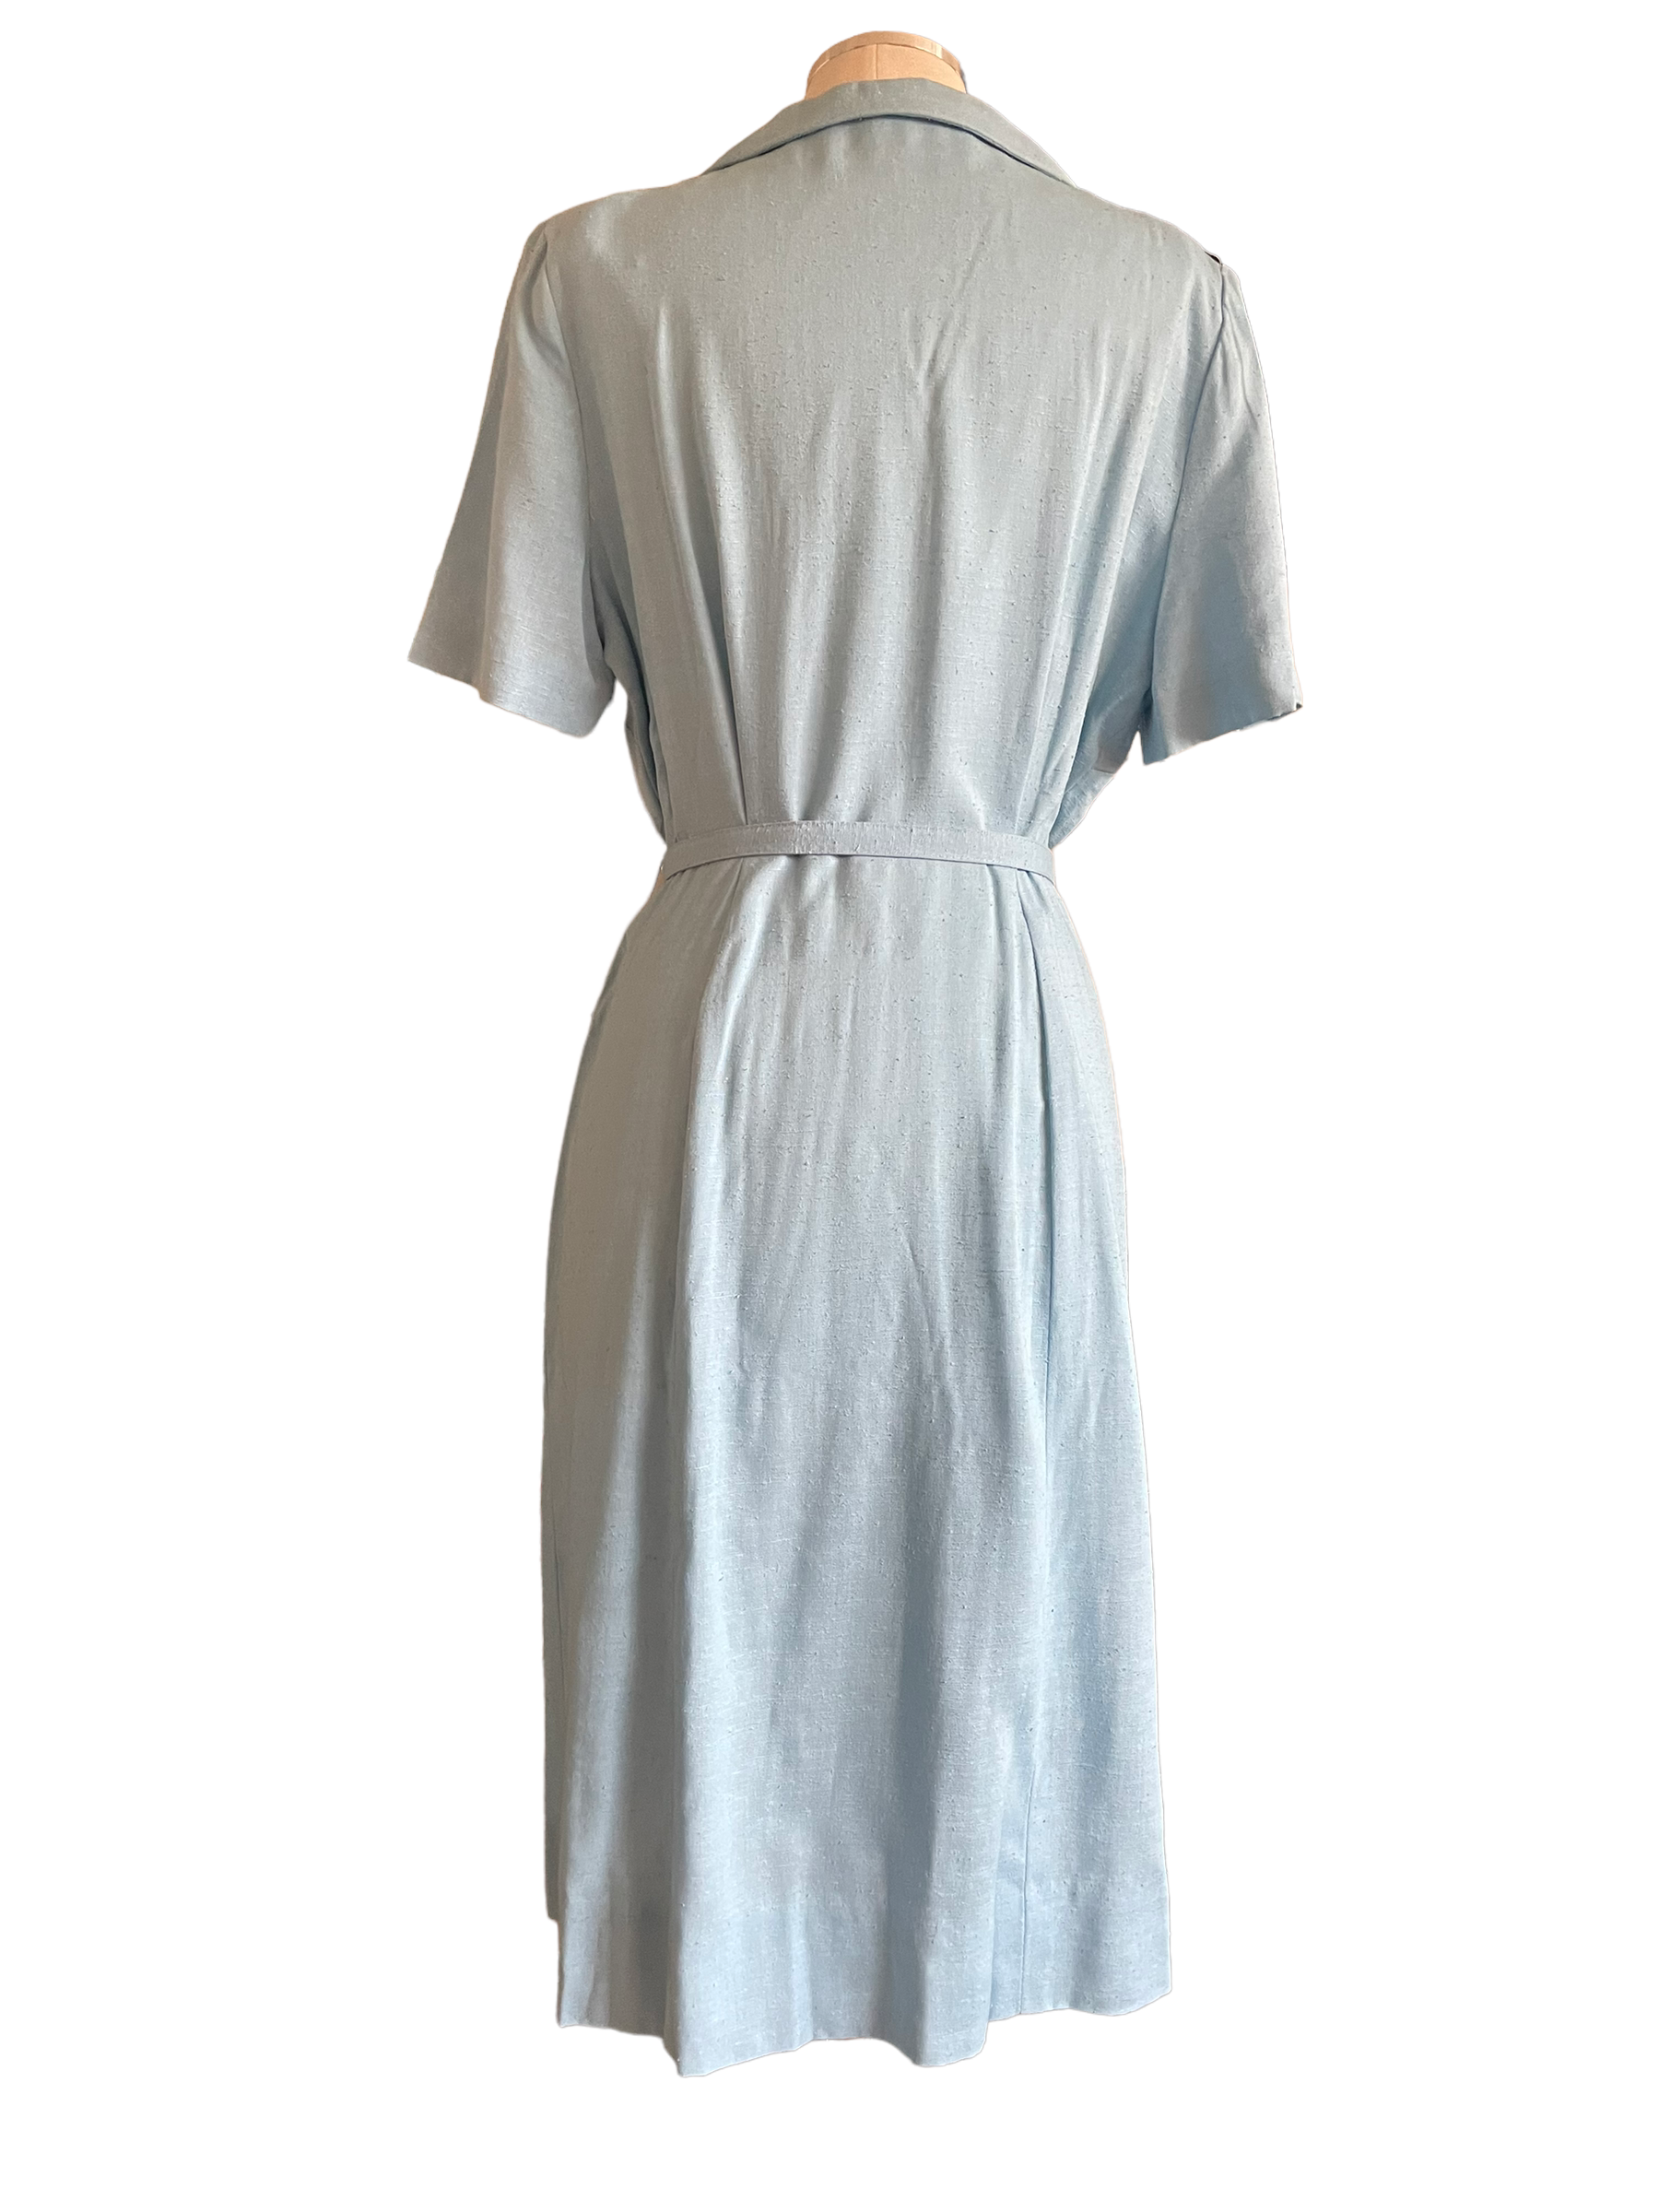 Vintage 1950s Deadstock Lordleigh Light Blue Silk and Rayon Dress SZ M|  Barn Owl Vintage | Seattle Vintage Dresses Full back view.